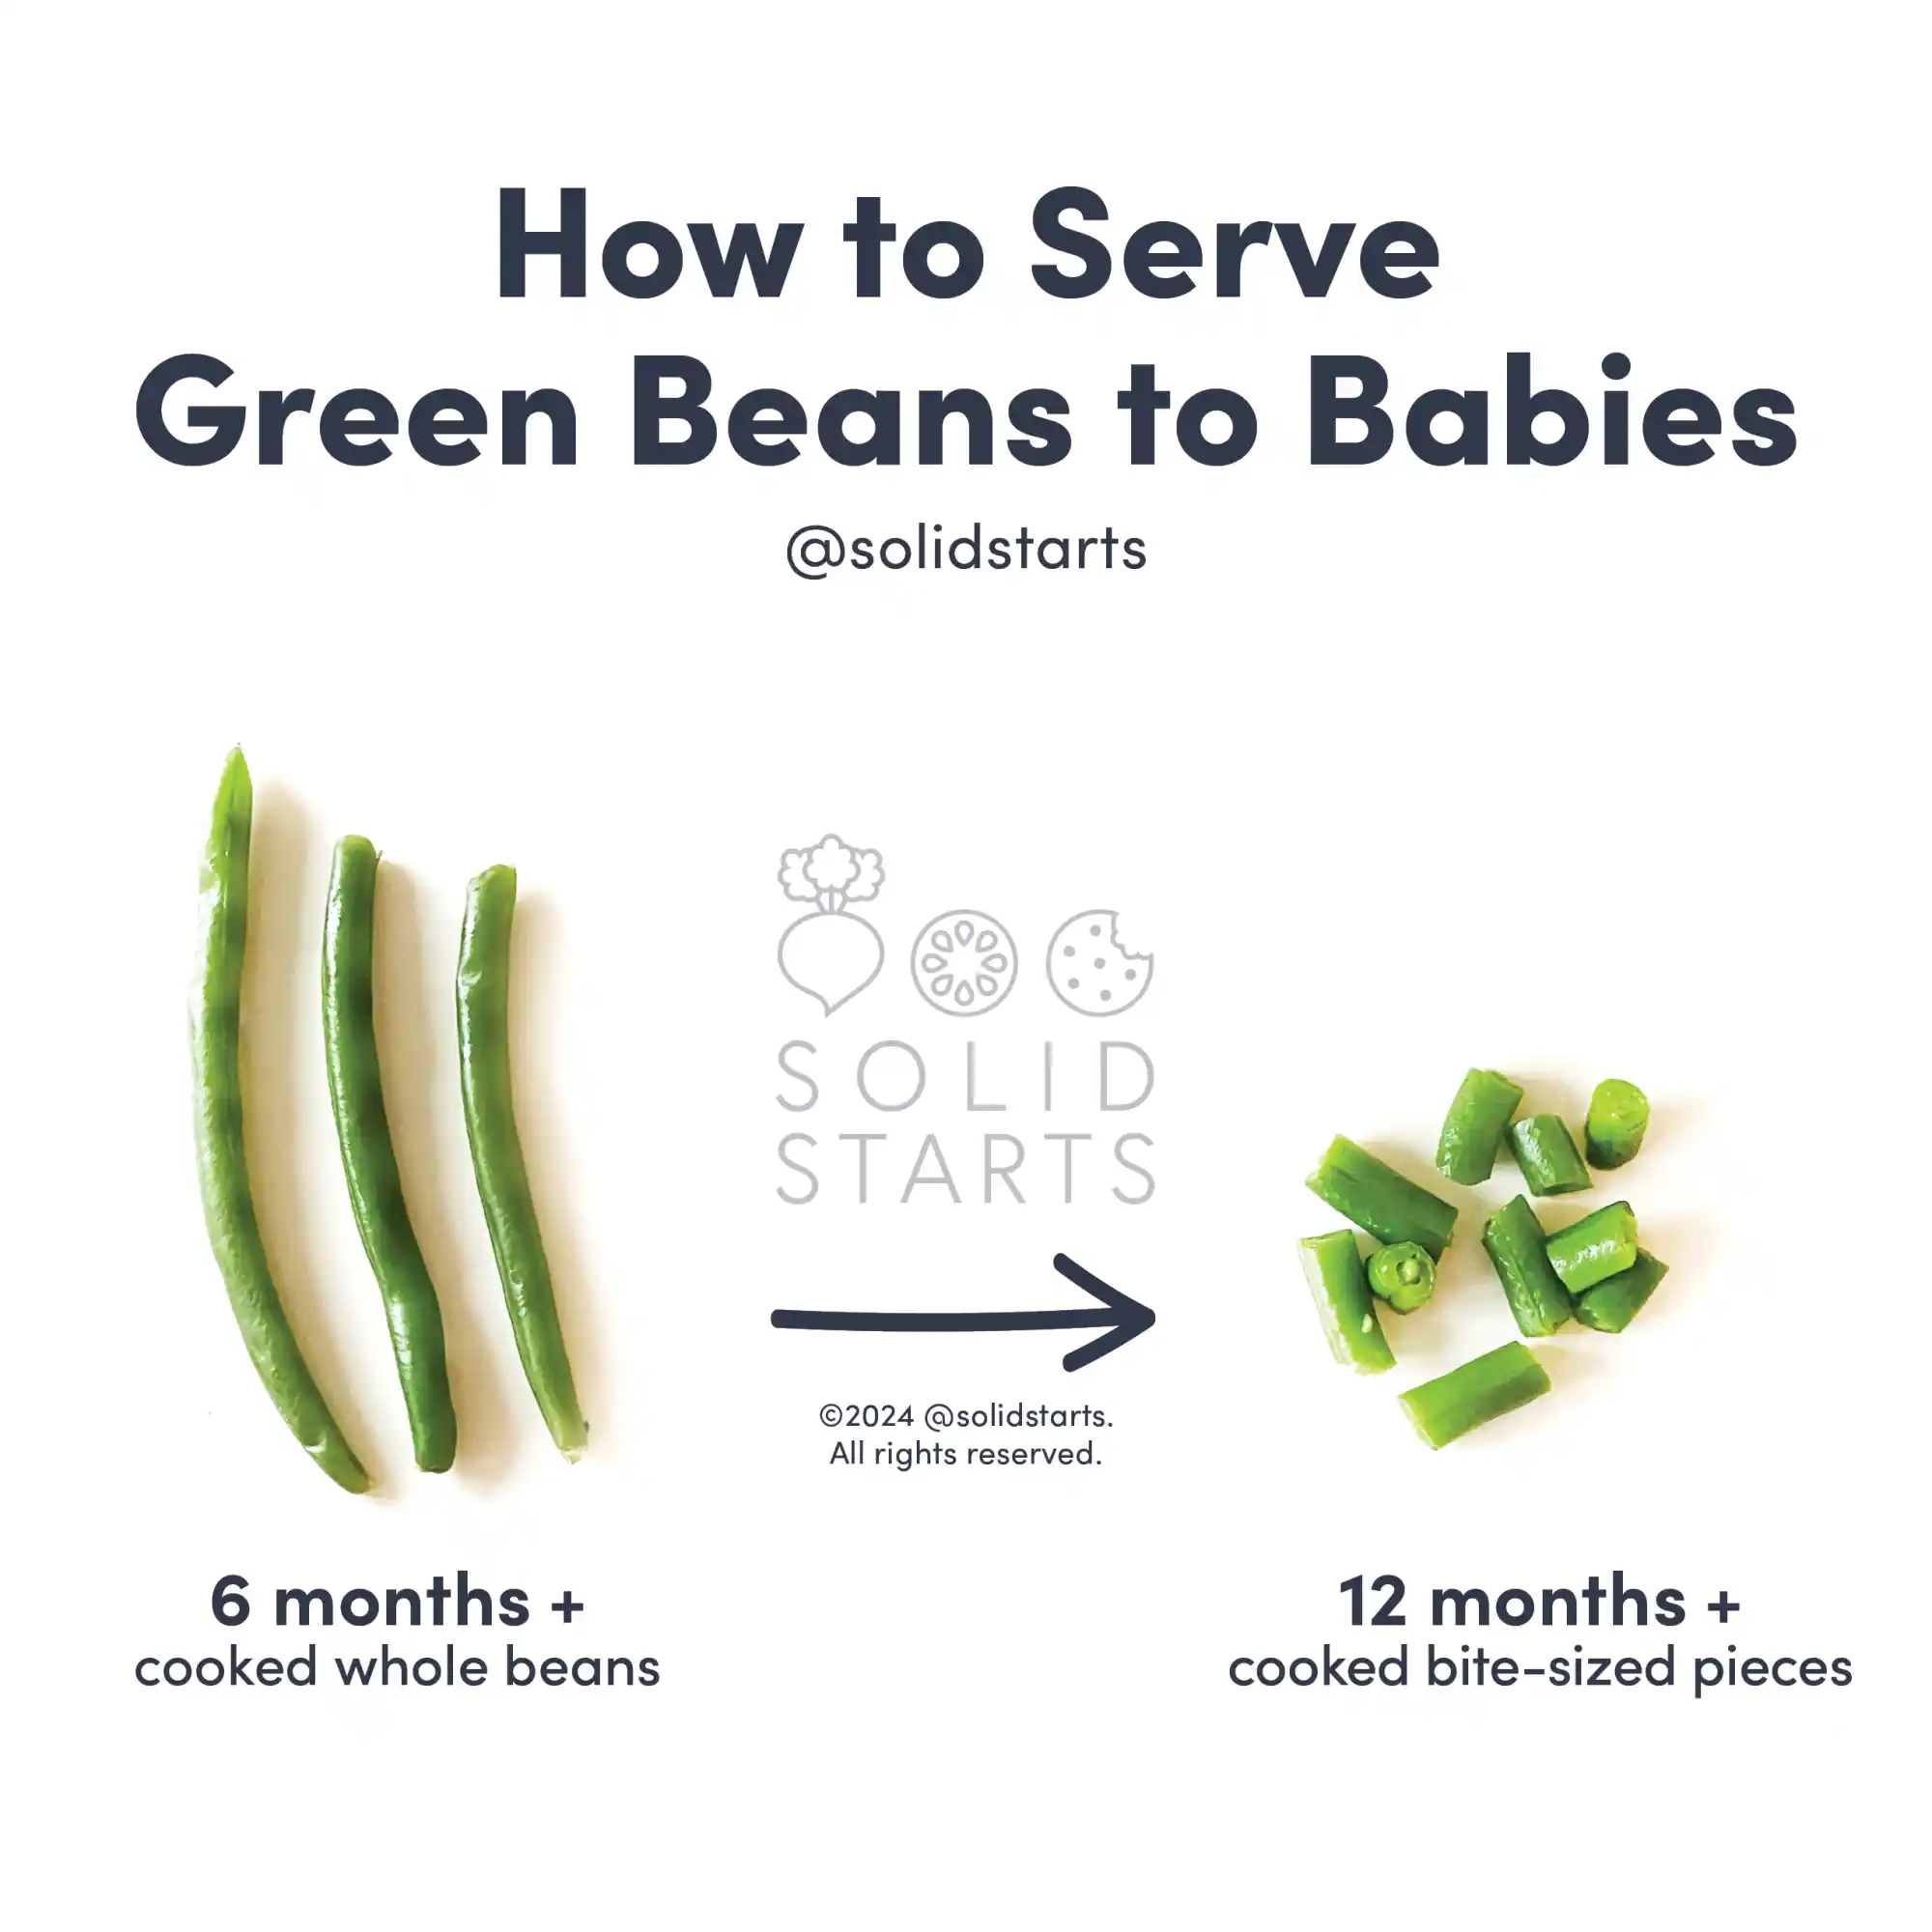 An infographic Titled How to Cut Green Beans for Babies and images showing whole, cooked green beans at 6-12 months+, bite size pieces at 12-18 months+, and either whole or bite size pieces for 18 months +